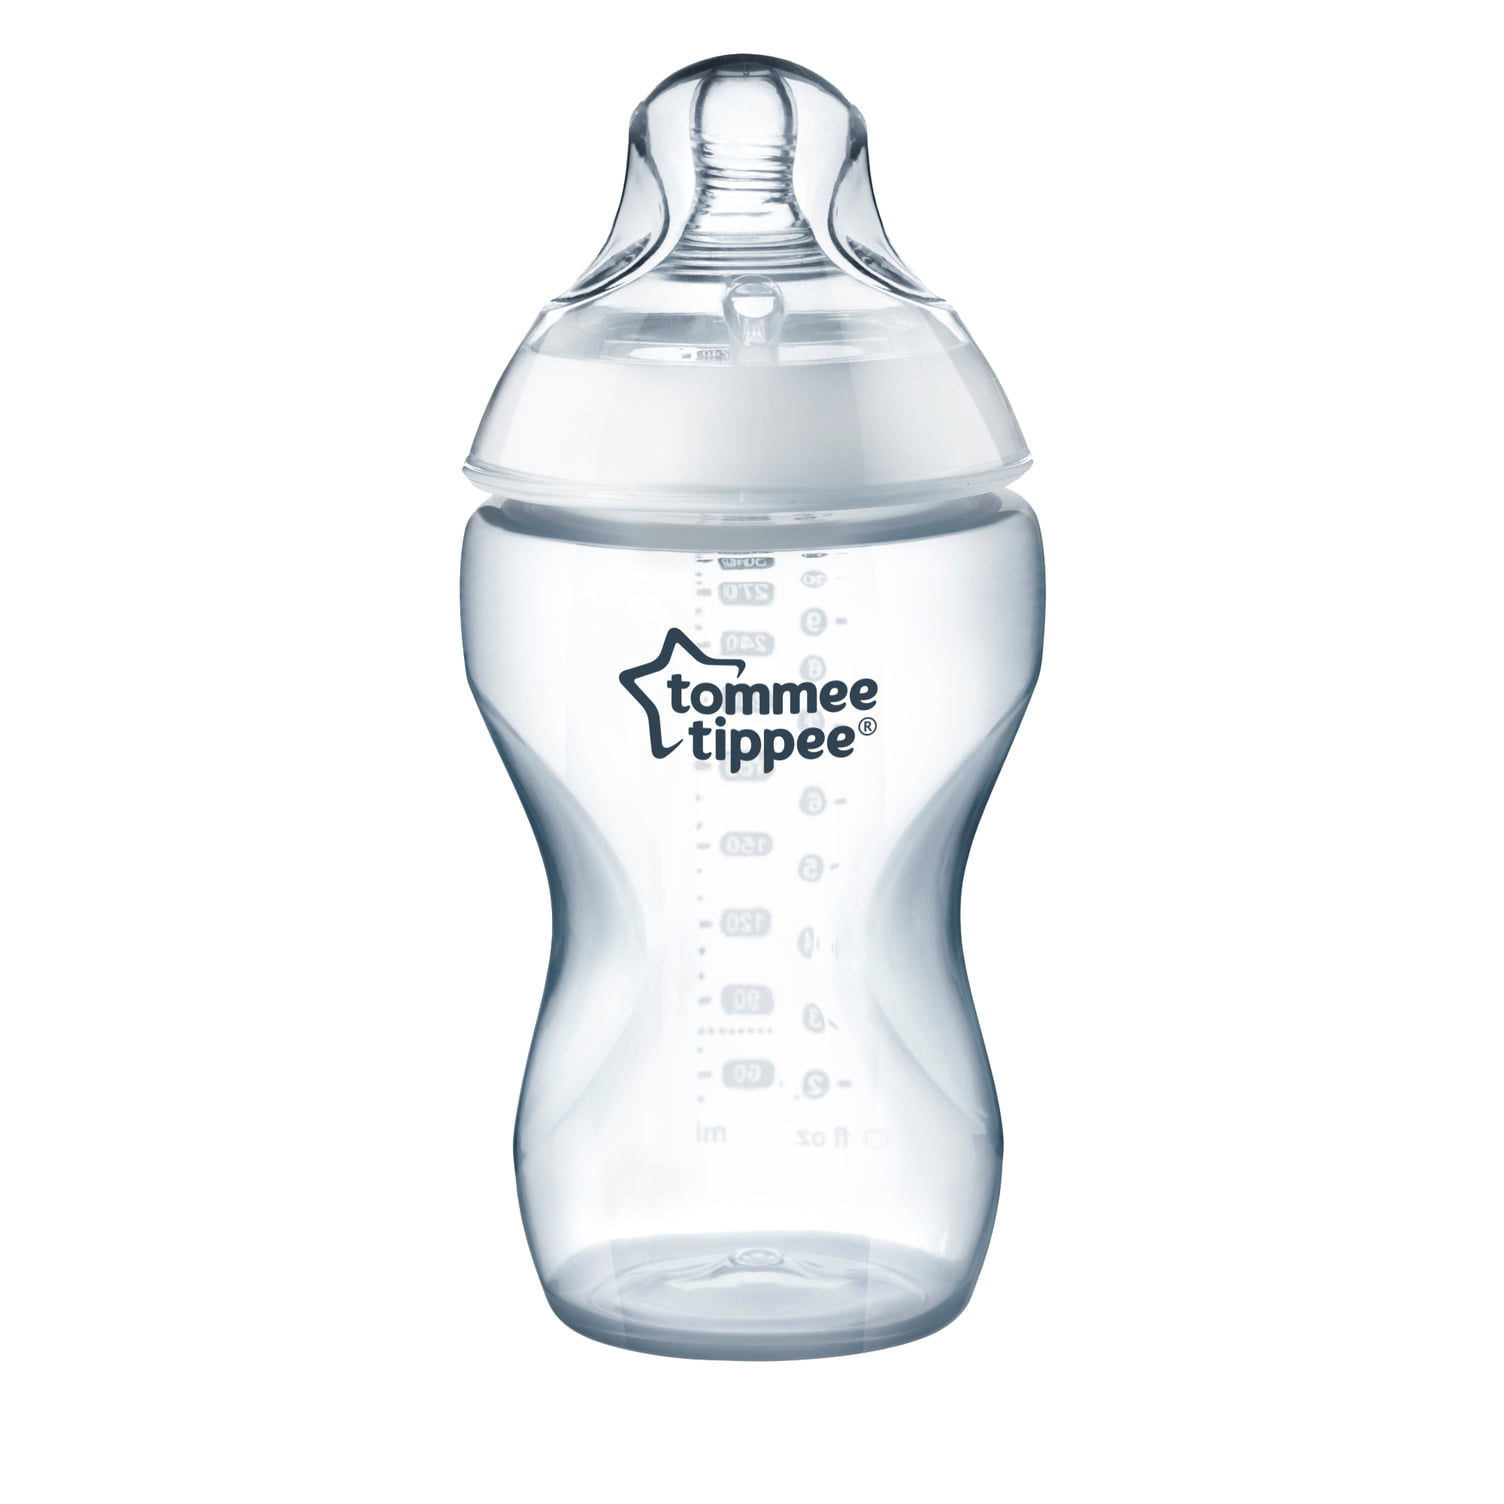 Tommee Tippee Closer to Nature Cereal Baby Bottle, Y-cut Bottle Nipple, – 1 Count - Walmart.com